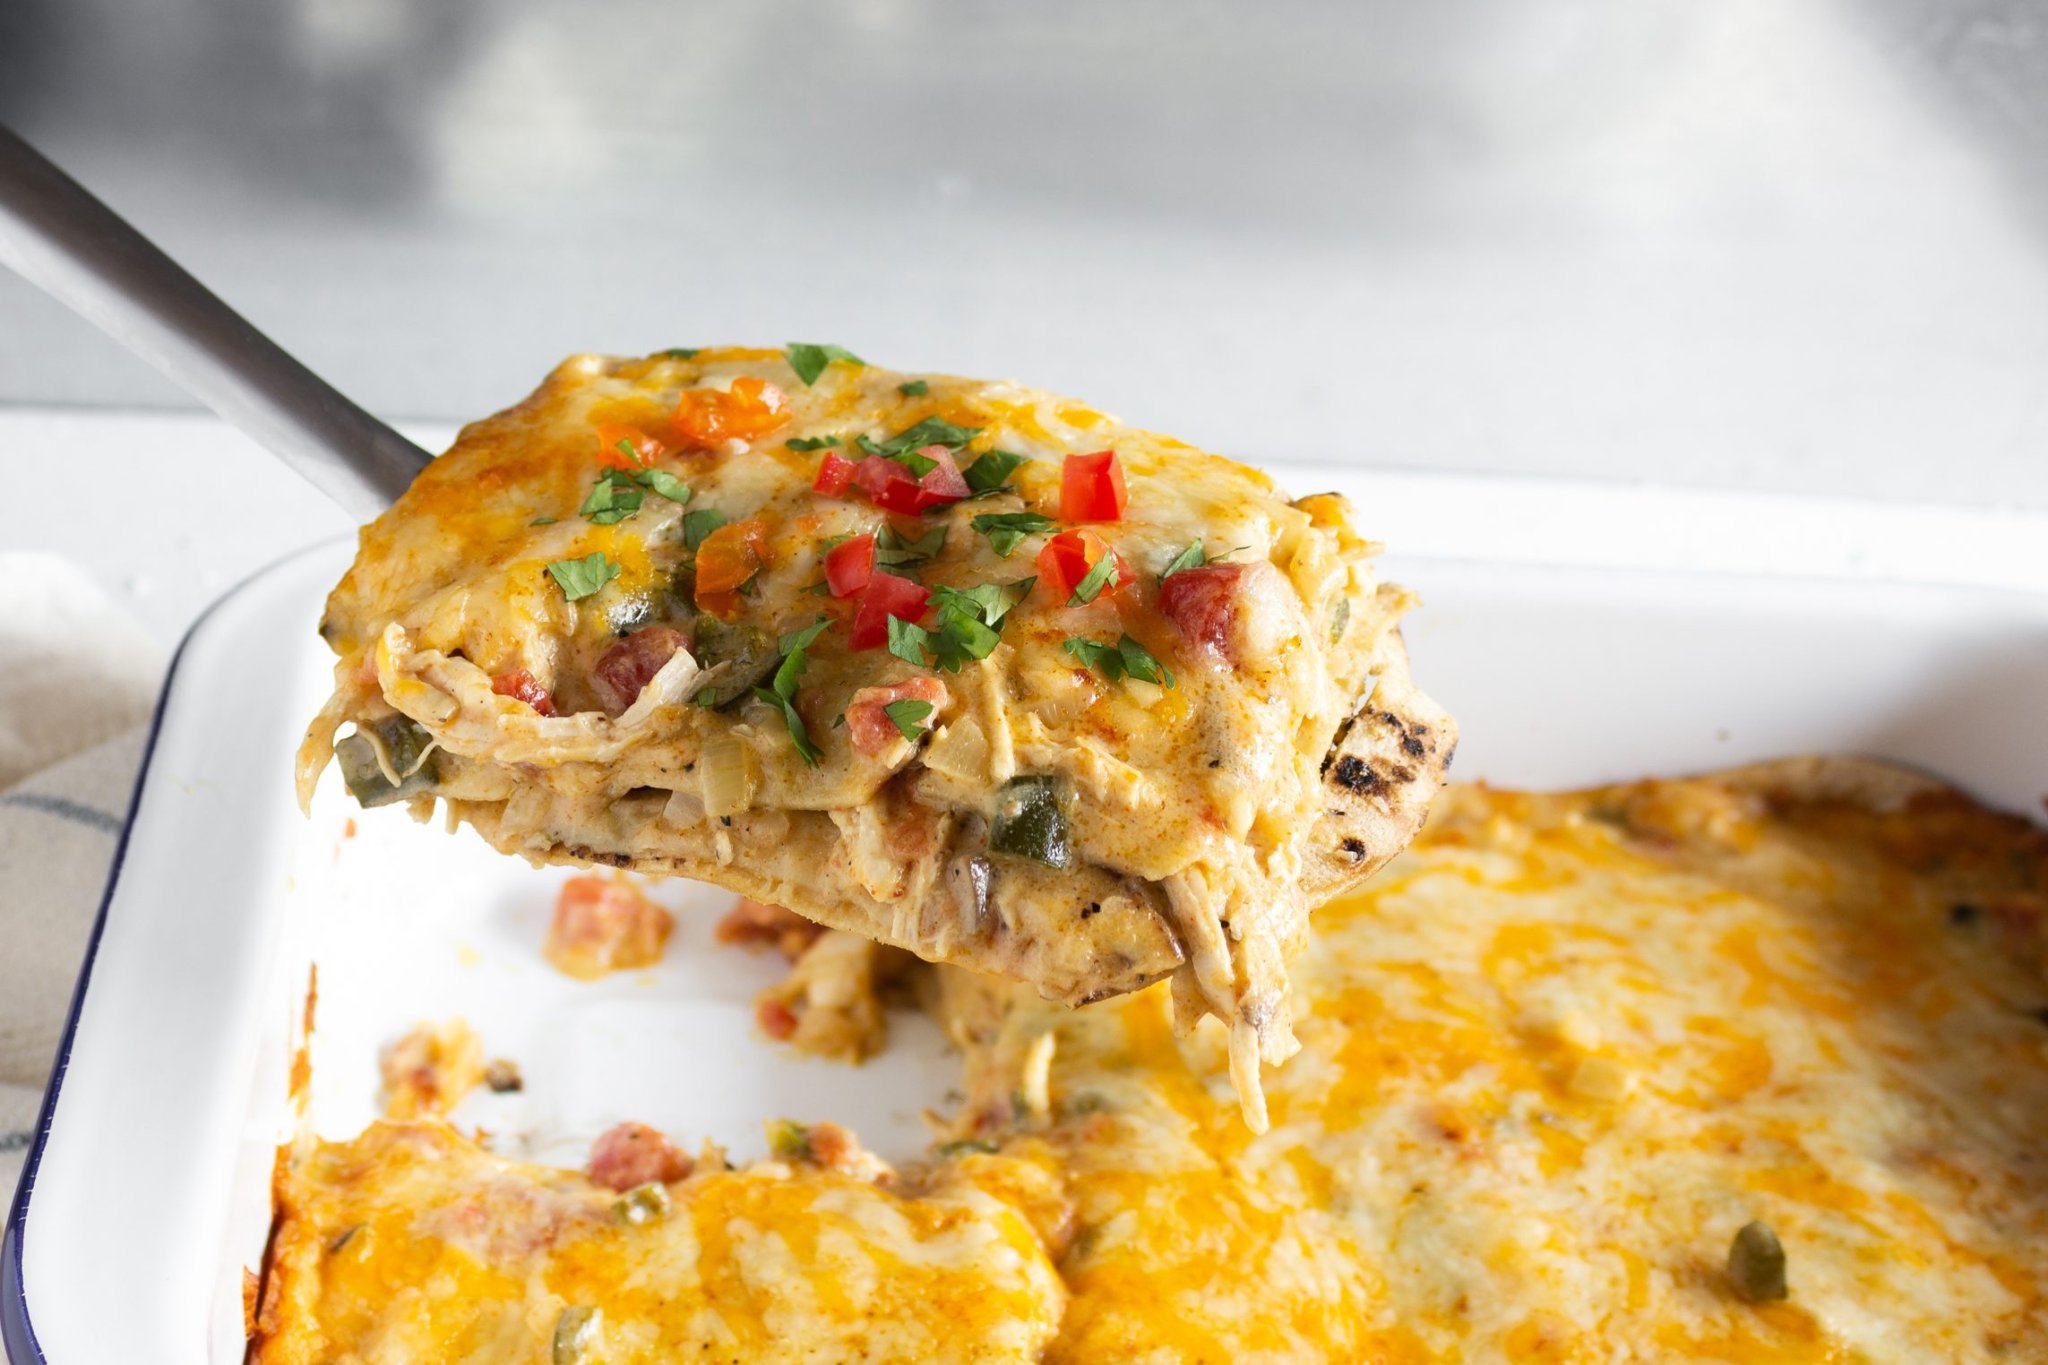 How to Make King Ranch Chicken Casserole, an Iconic Texas Recipe